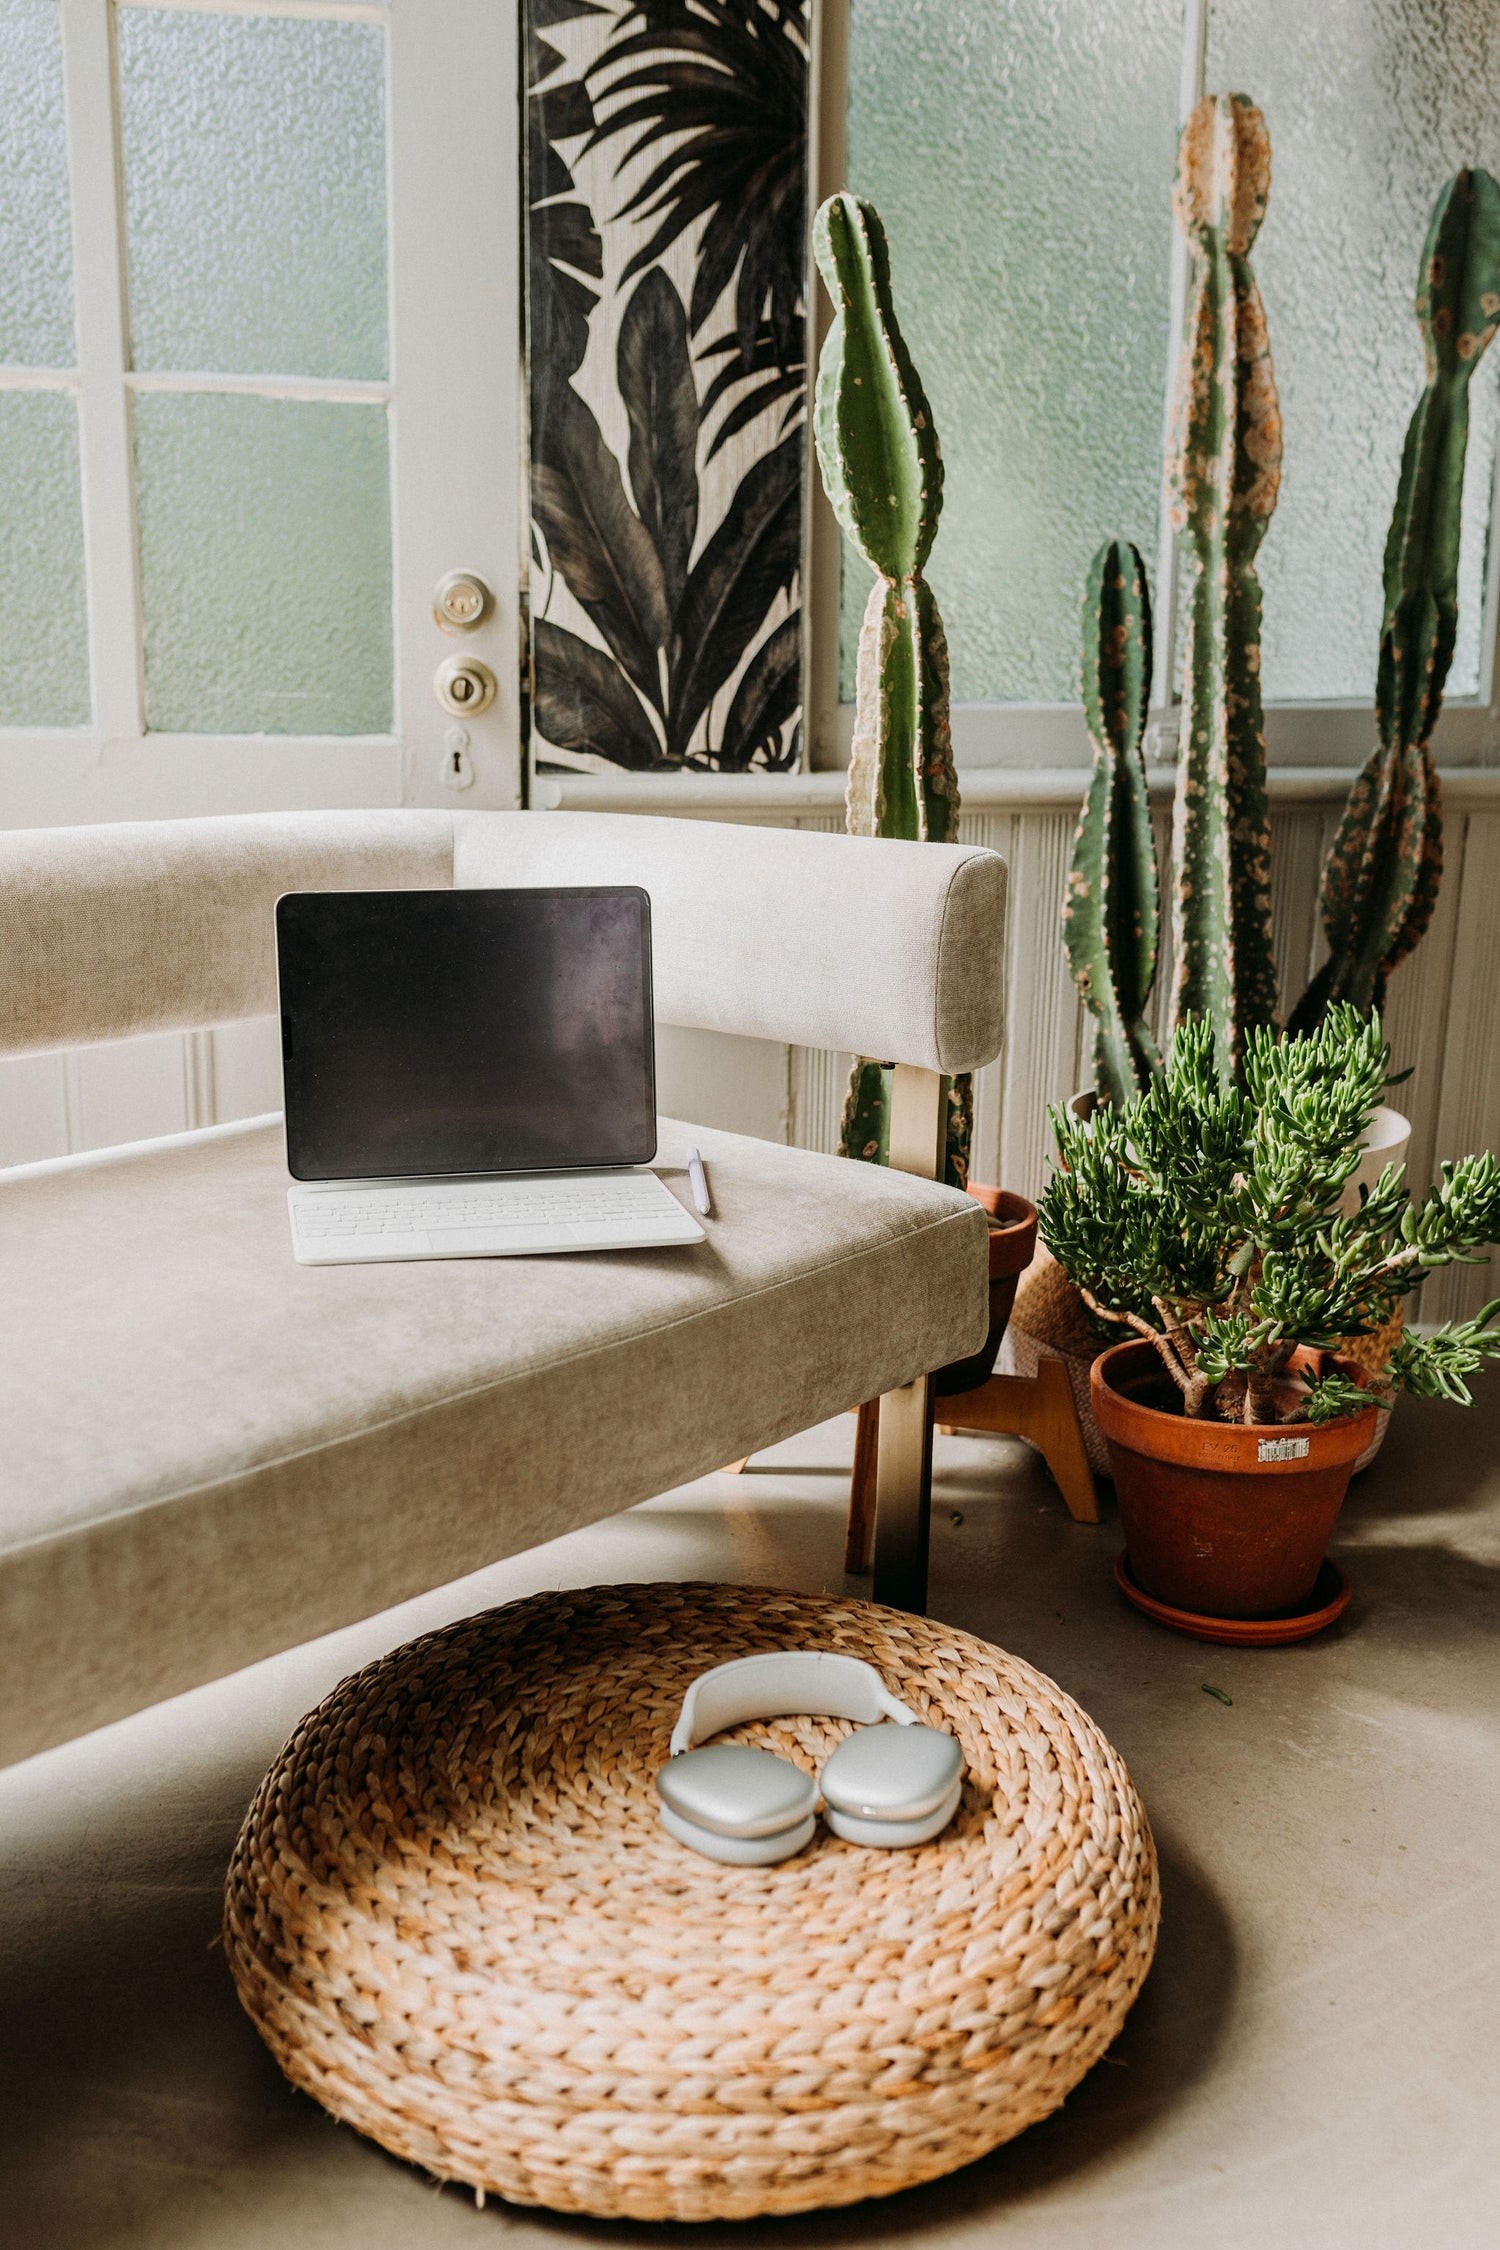 iPad attached to Magic Keyboard sitting on a modern couch next to cactus plants. In front of the couch is a wicker poof where Airpods Max are displayed.